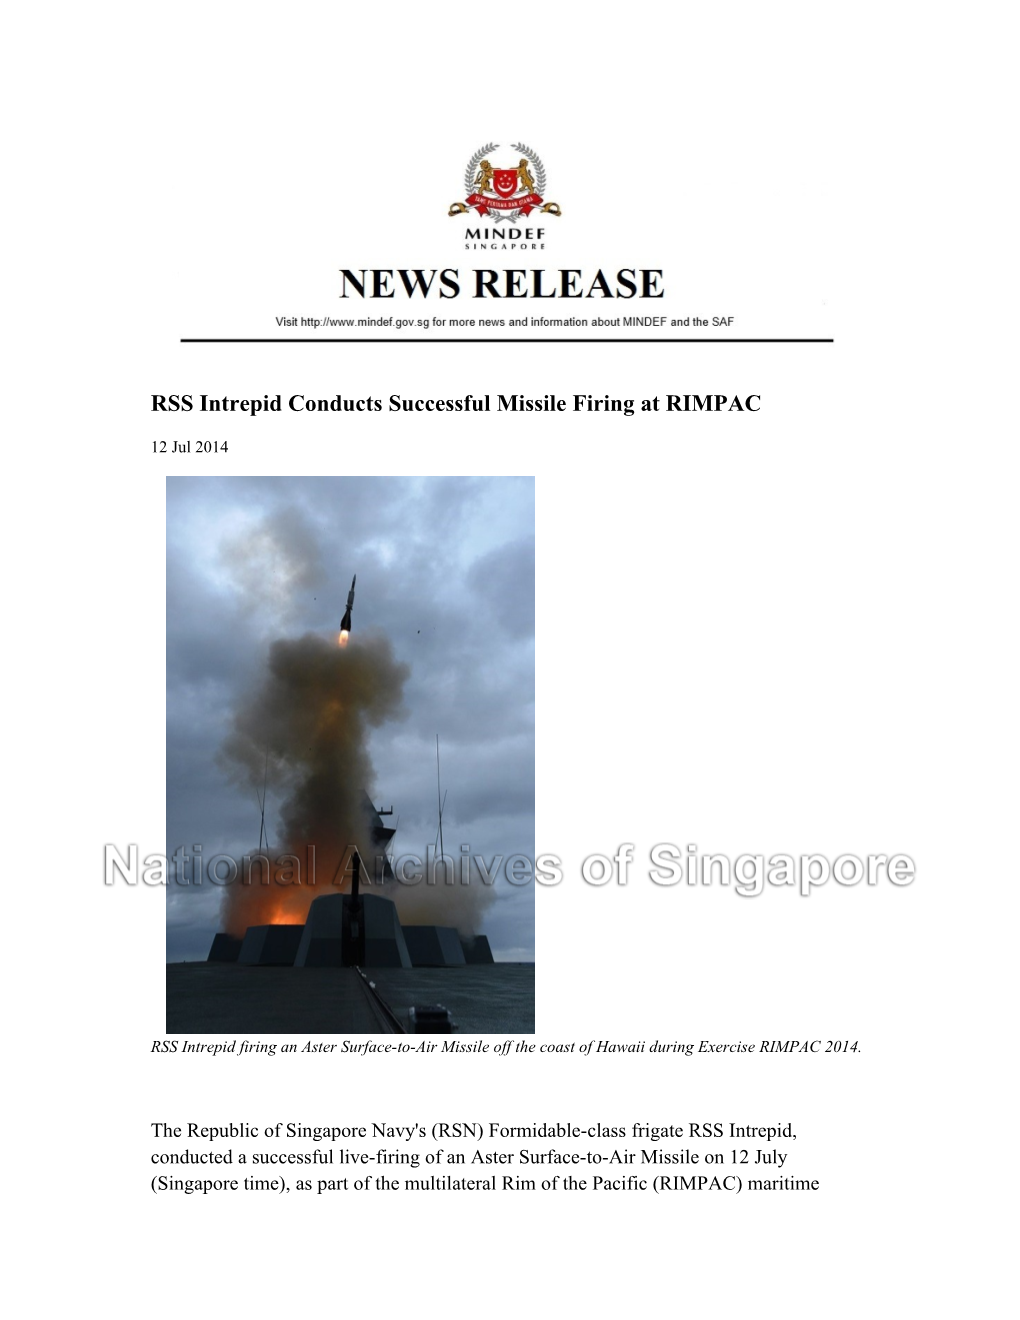 RSS Intrepid Conducts Successful Missile Firing at RIMPAC